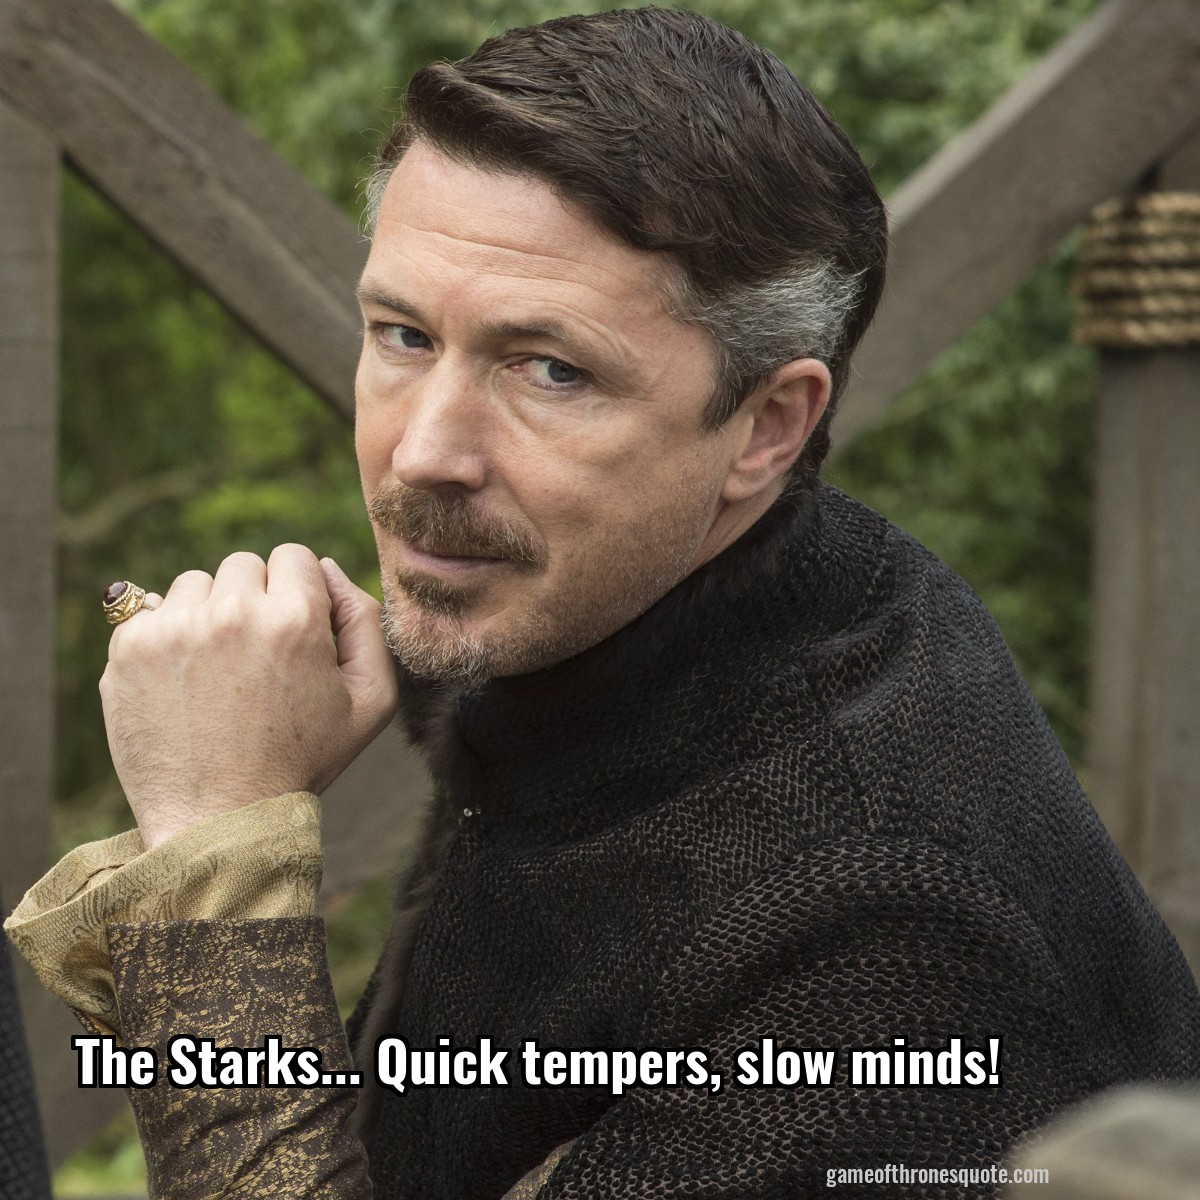 The Starks... Quick tempers, slow minds!